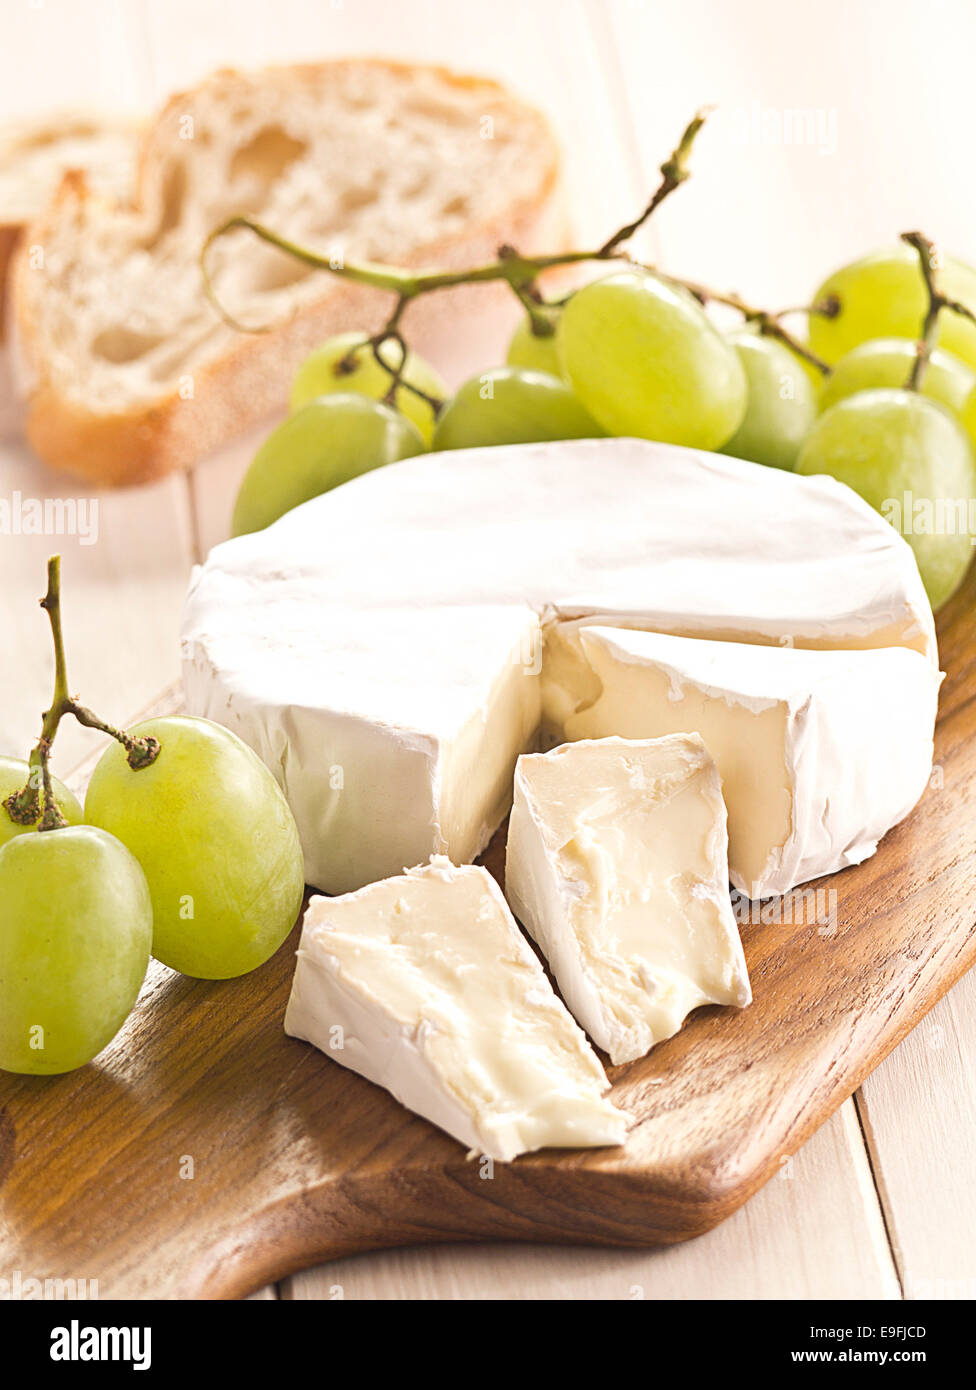 Cheese board with Camenbert and grapes Stock Photo